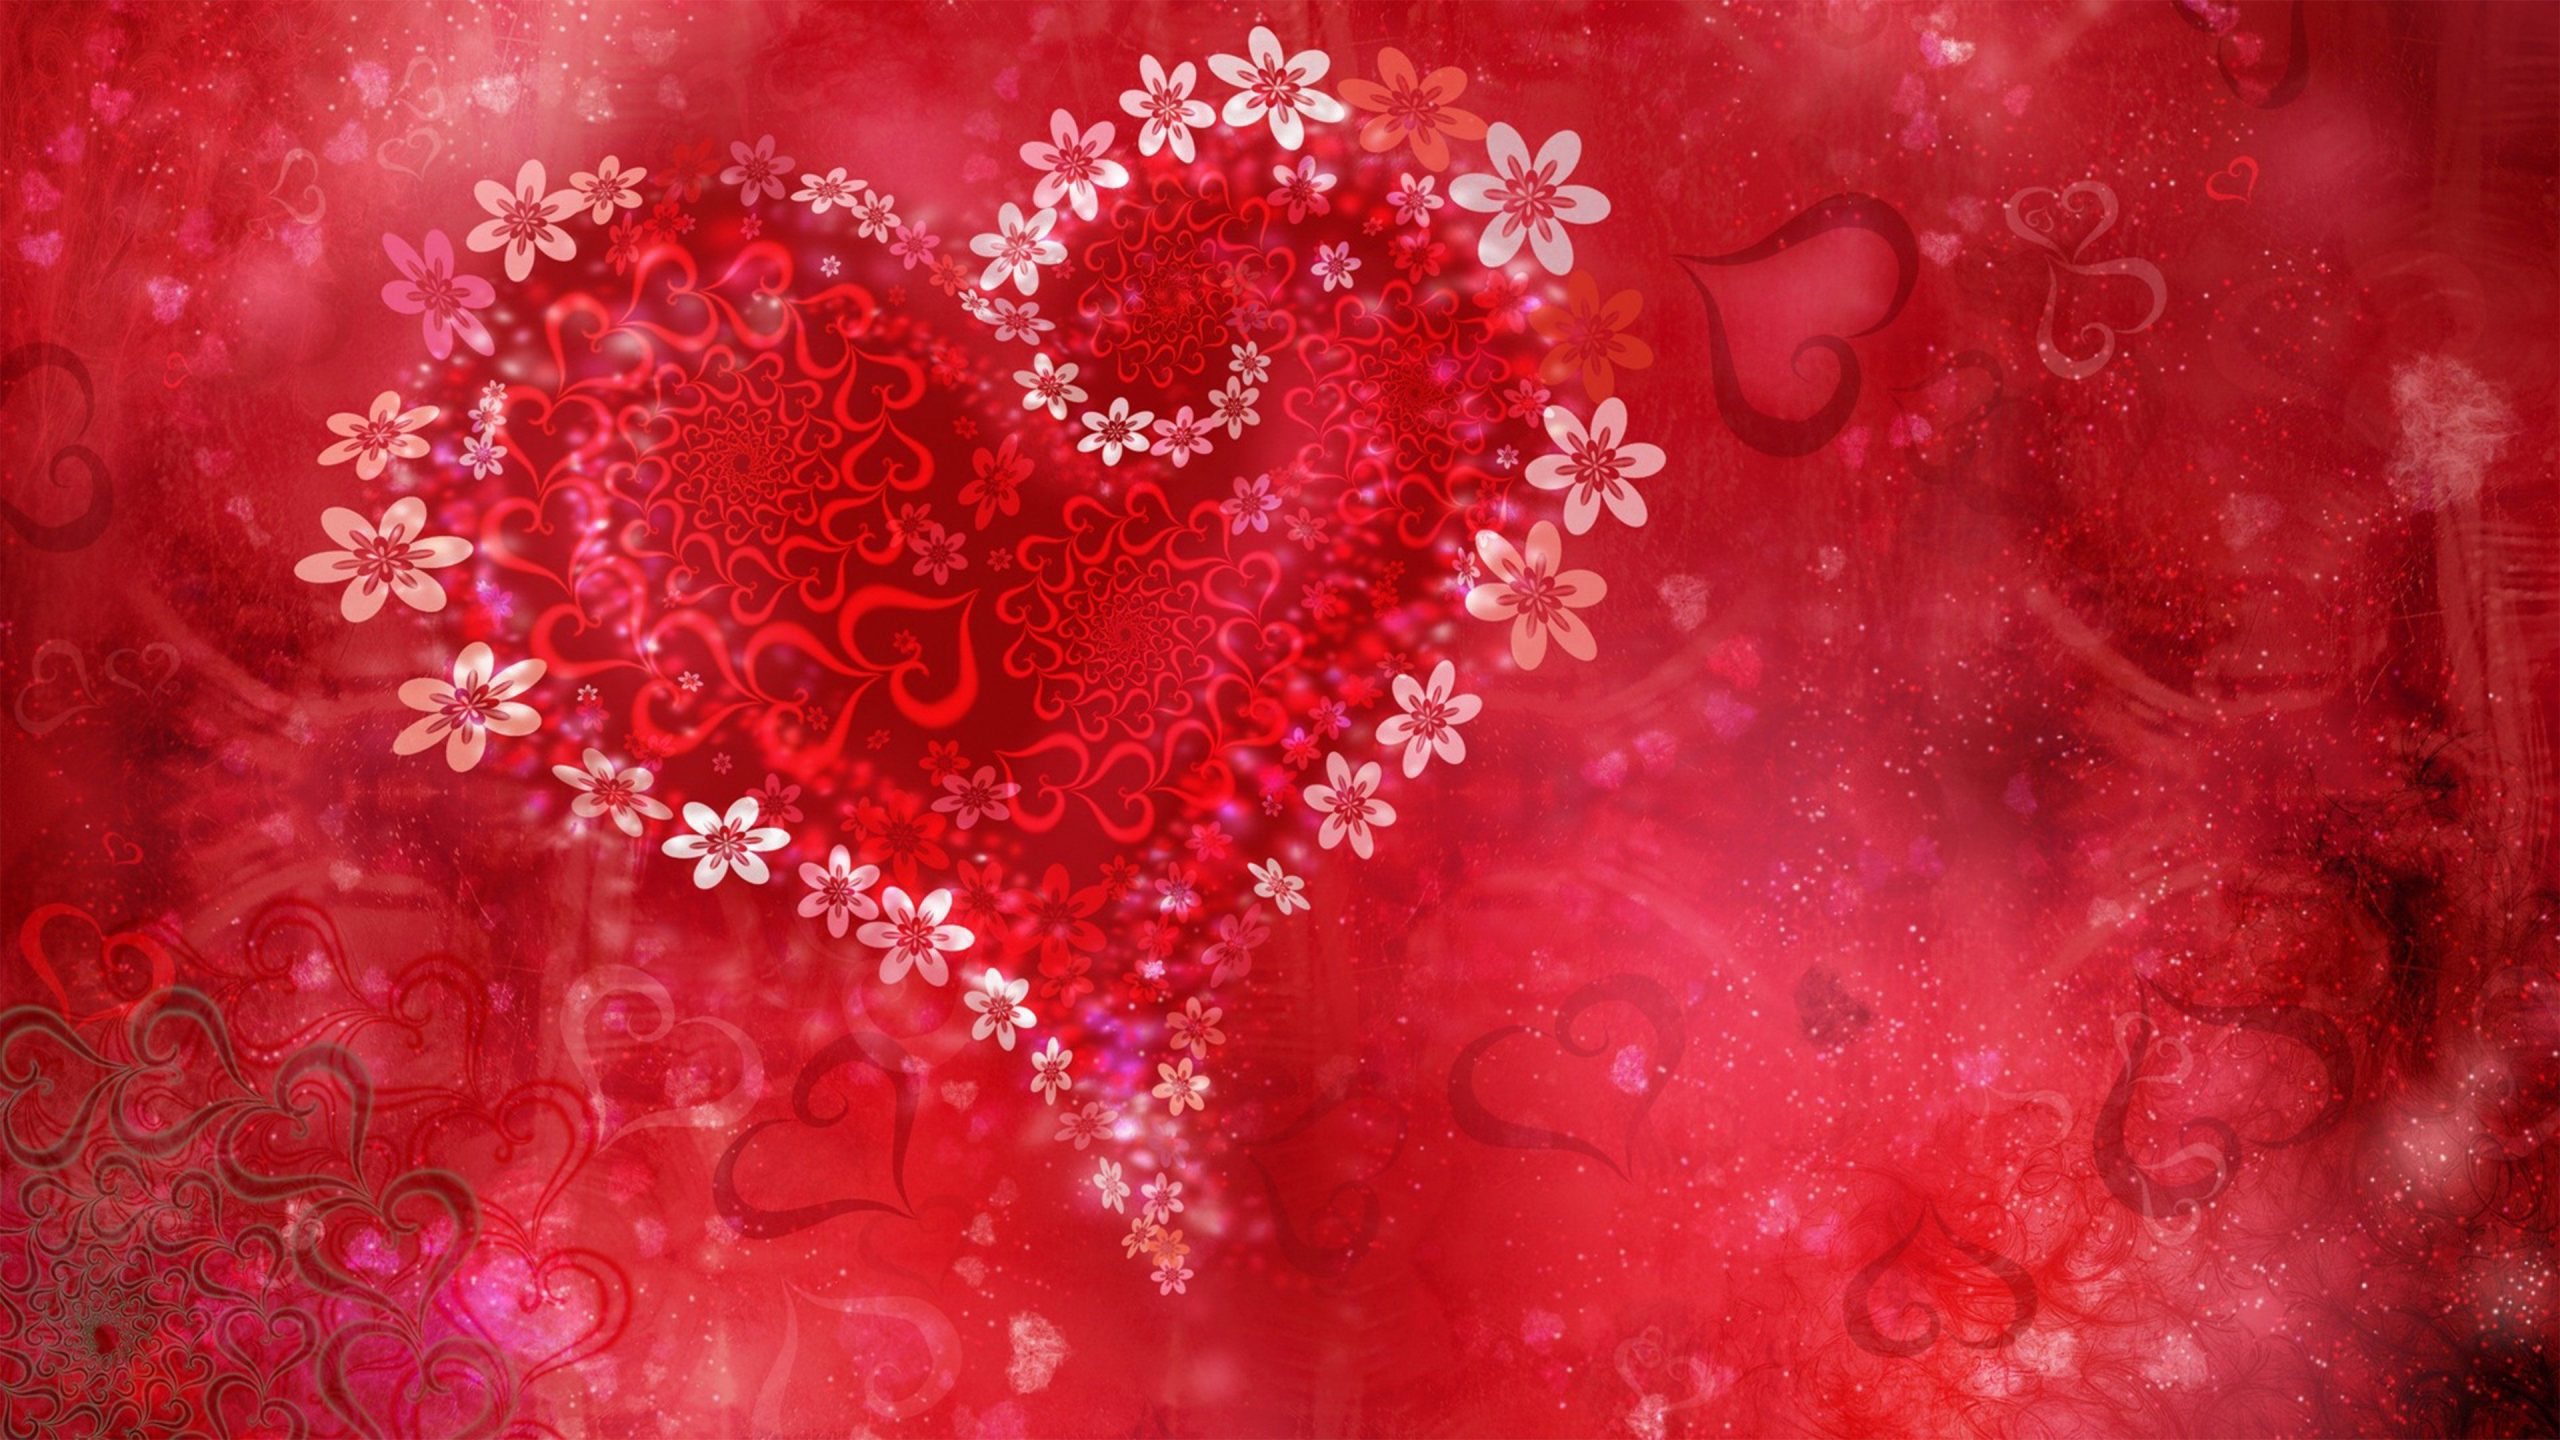 Valentines day images free download wallpaper